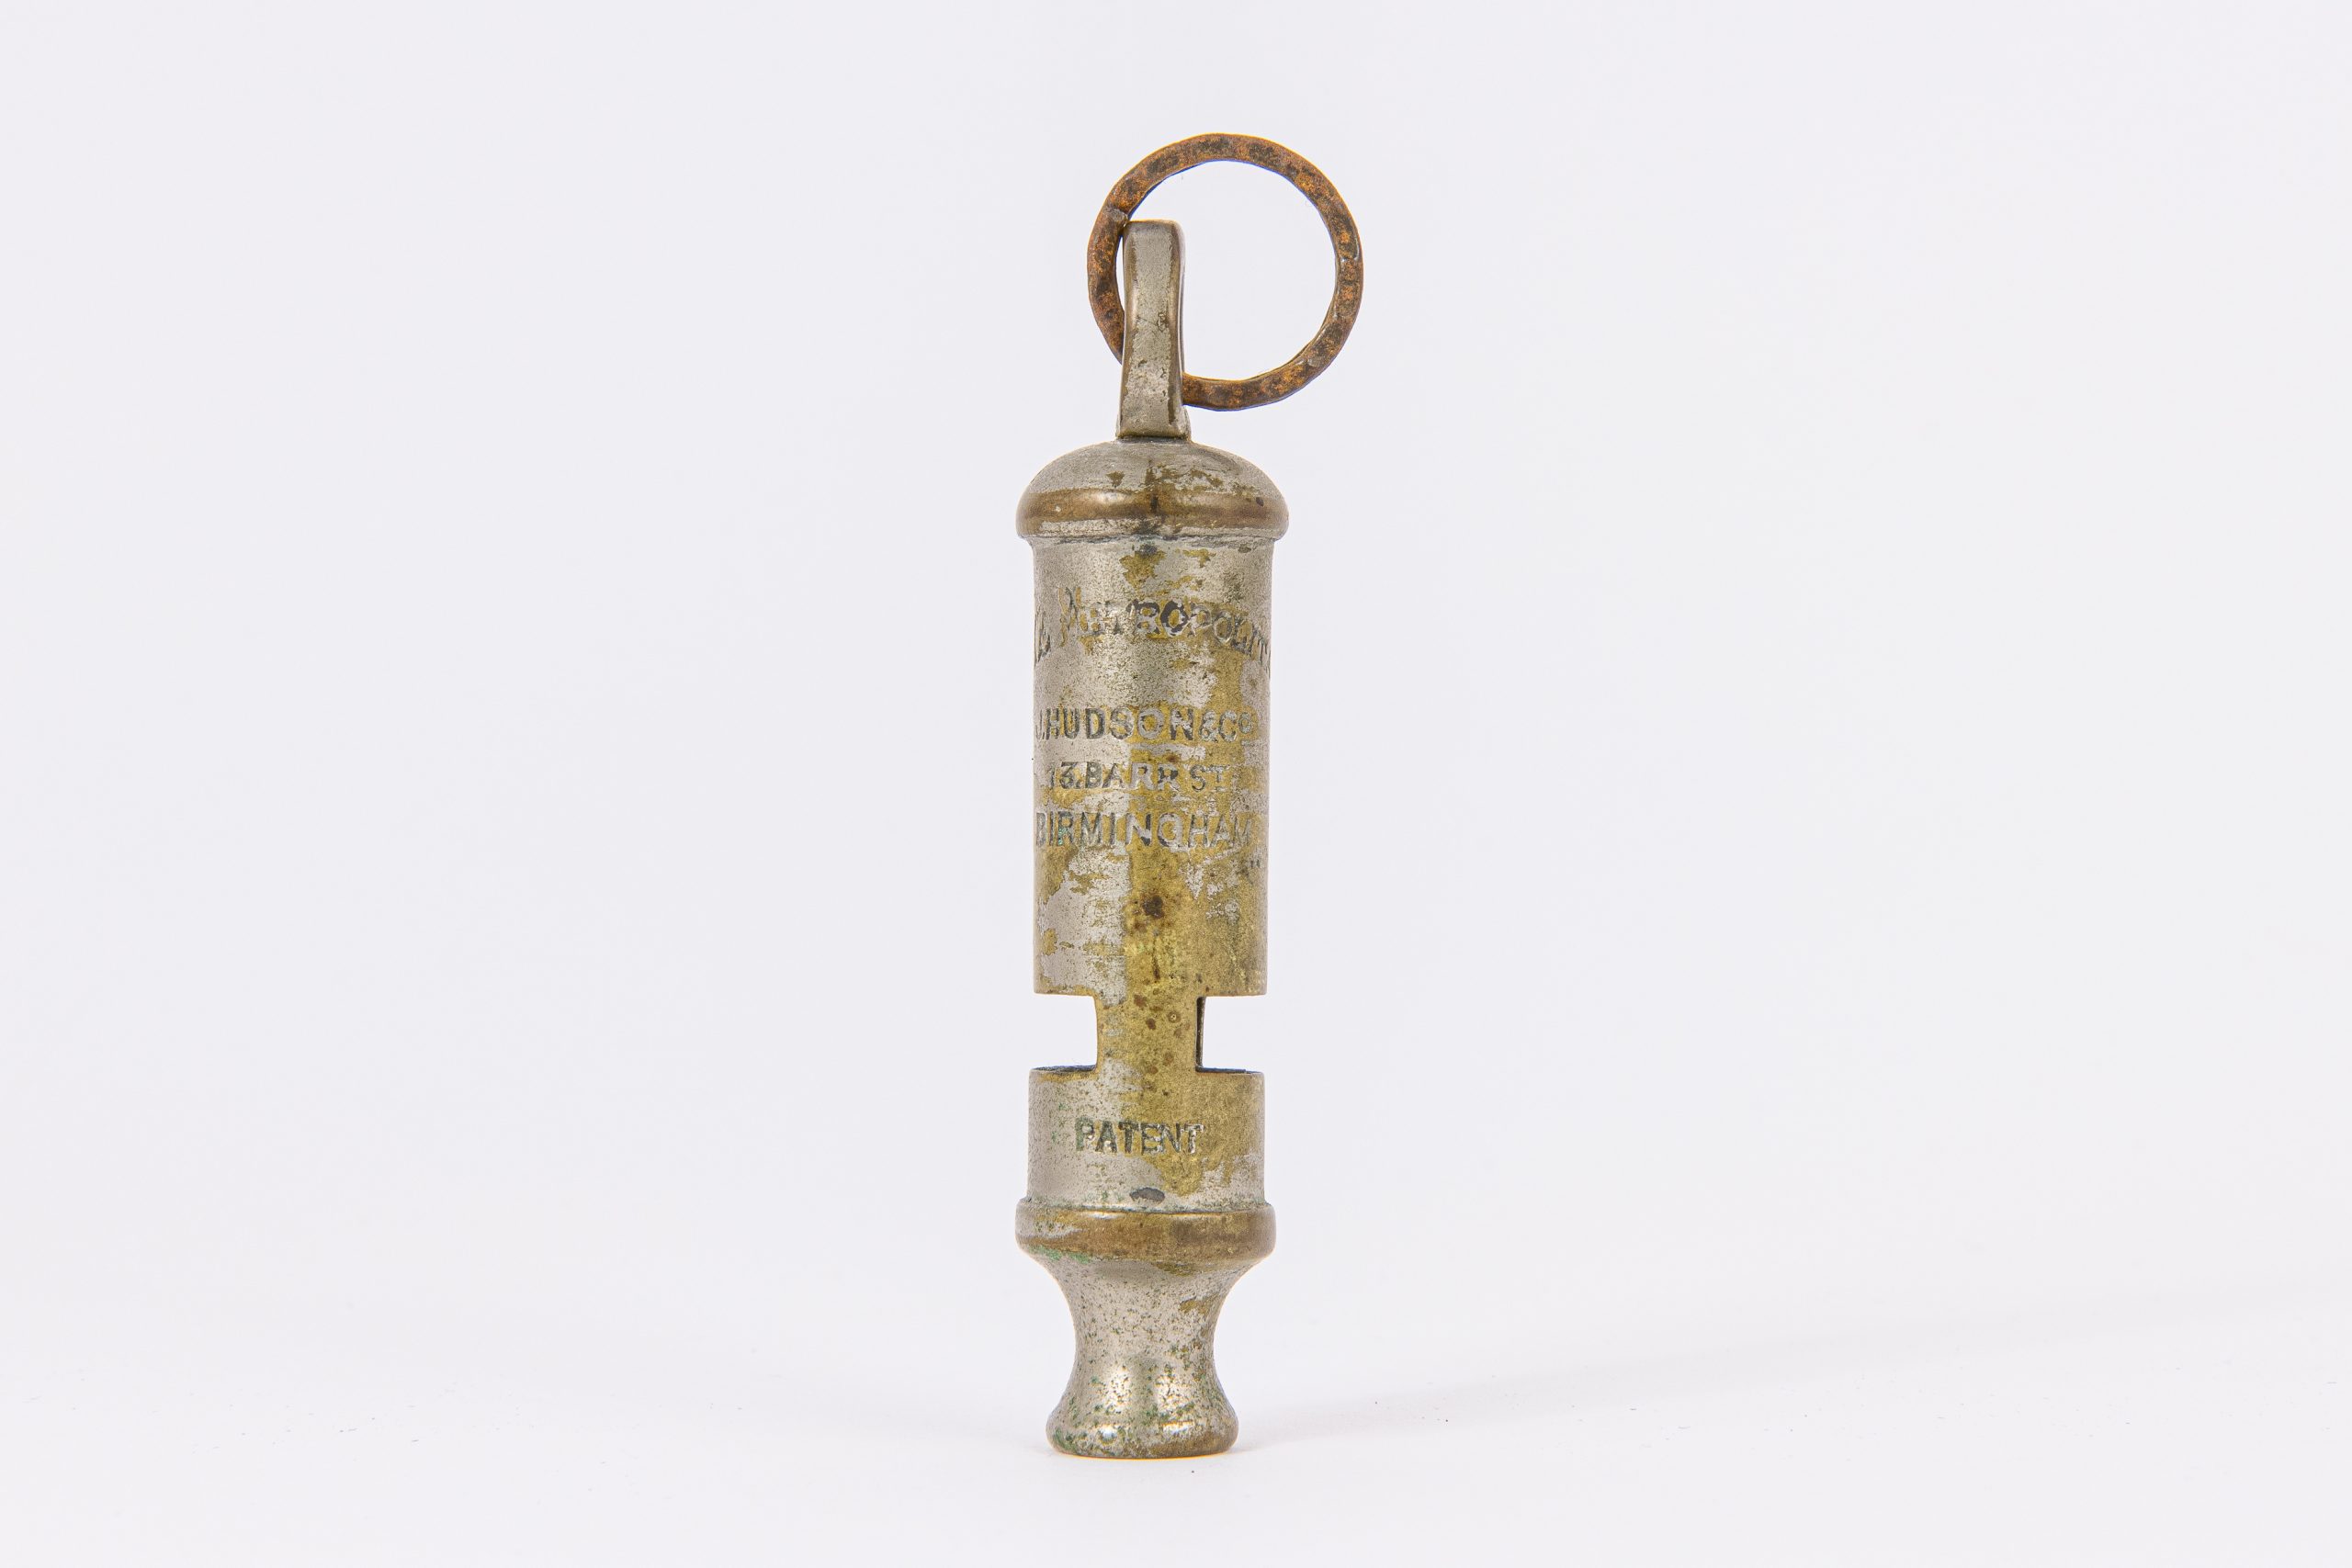 Tarnished, silver metal whistle, cylindrical in shape with a ring attachment. Engraved with "HUDSON AND CO." and "BIRMINGHAM."